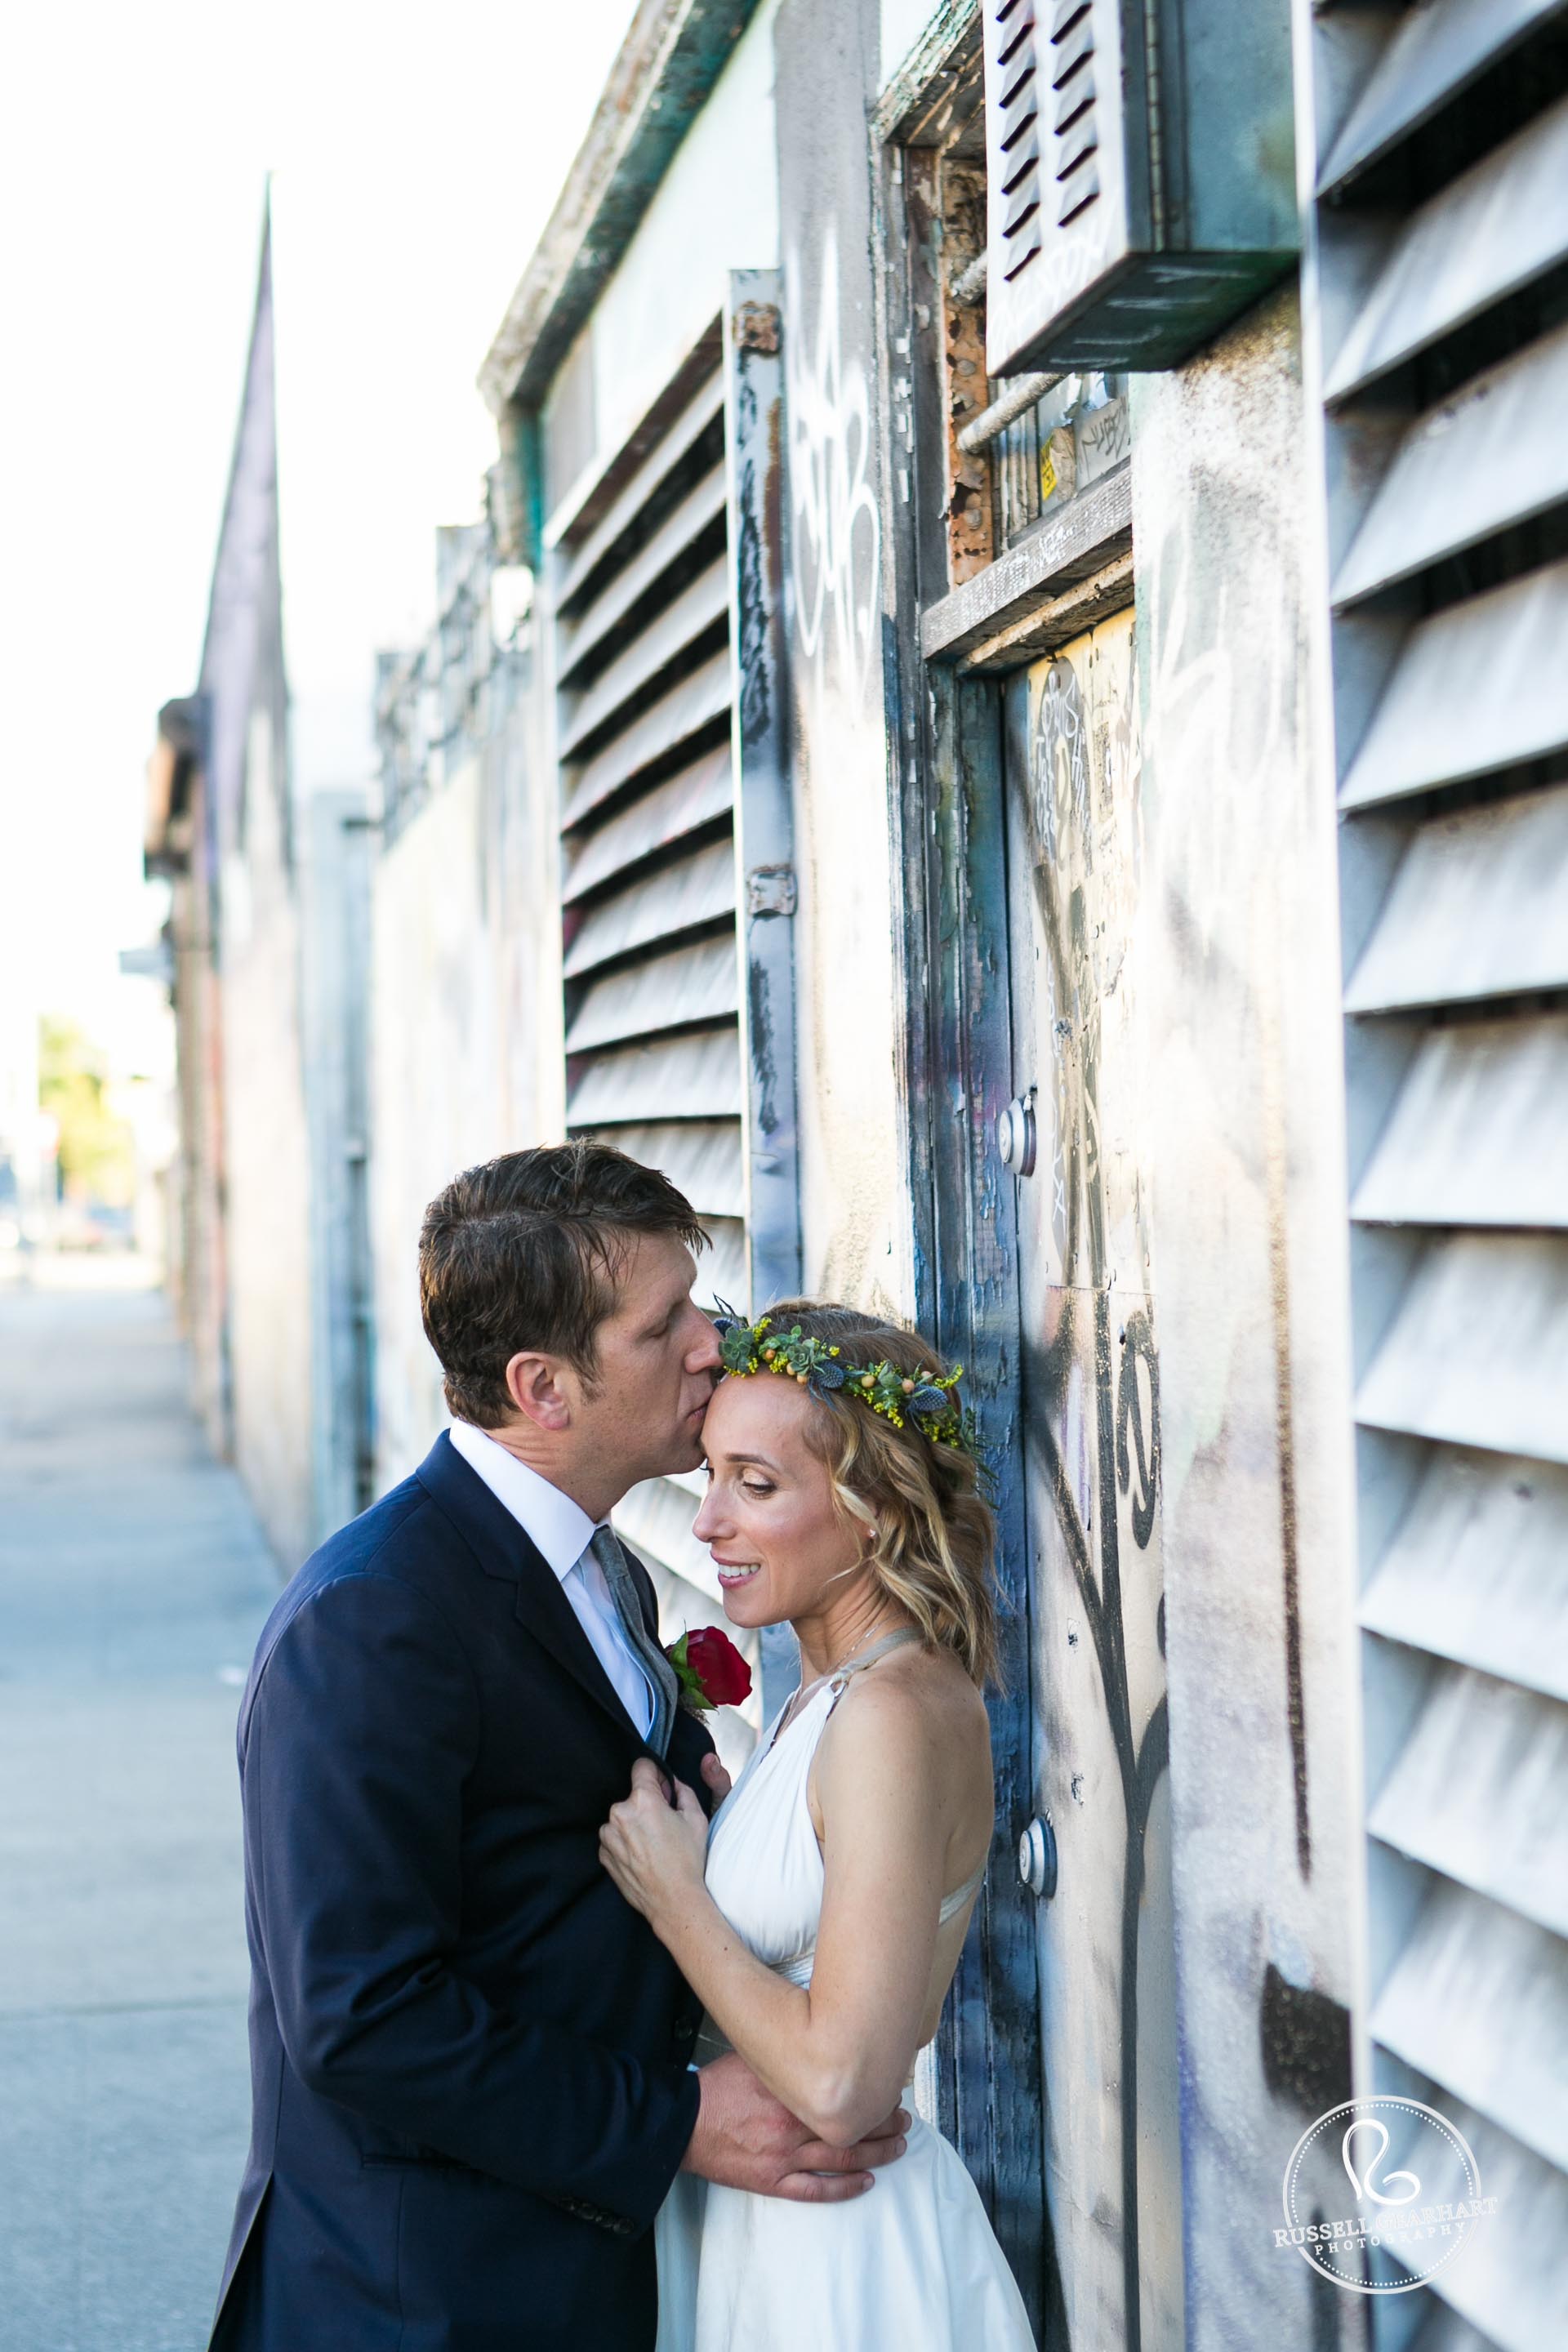 Urban Los Angeles Bride and Groom Portraits – Millwick Wedding in Downton Los Angeles – www.gearhartphoto.com – Russell Gearhart Photography